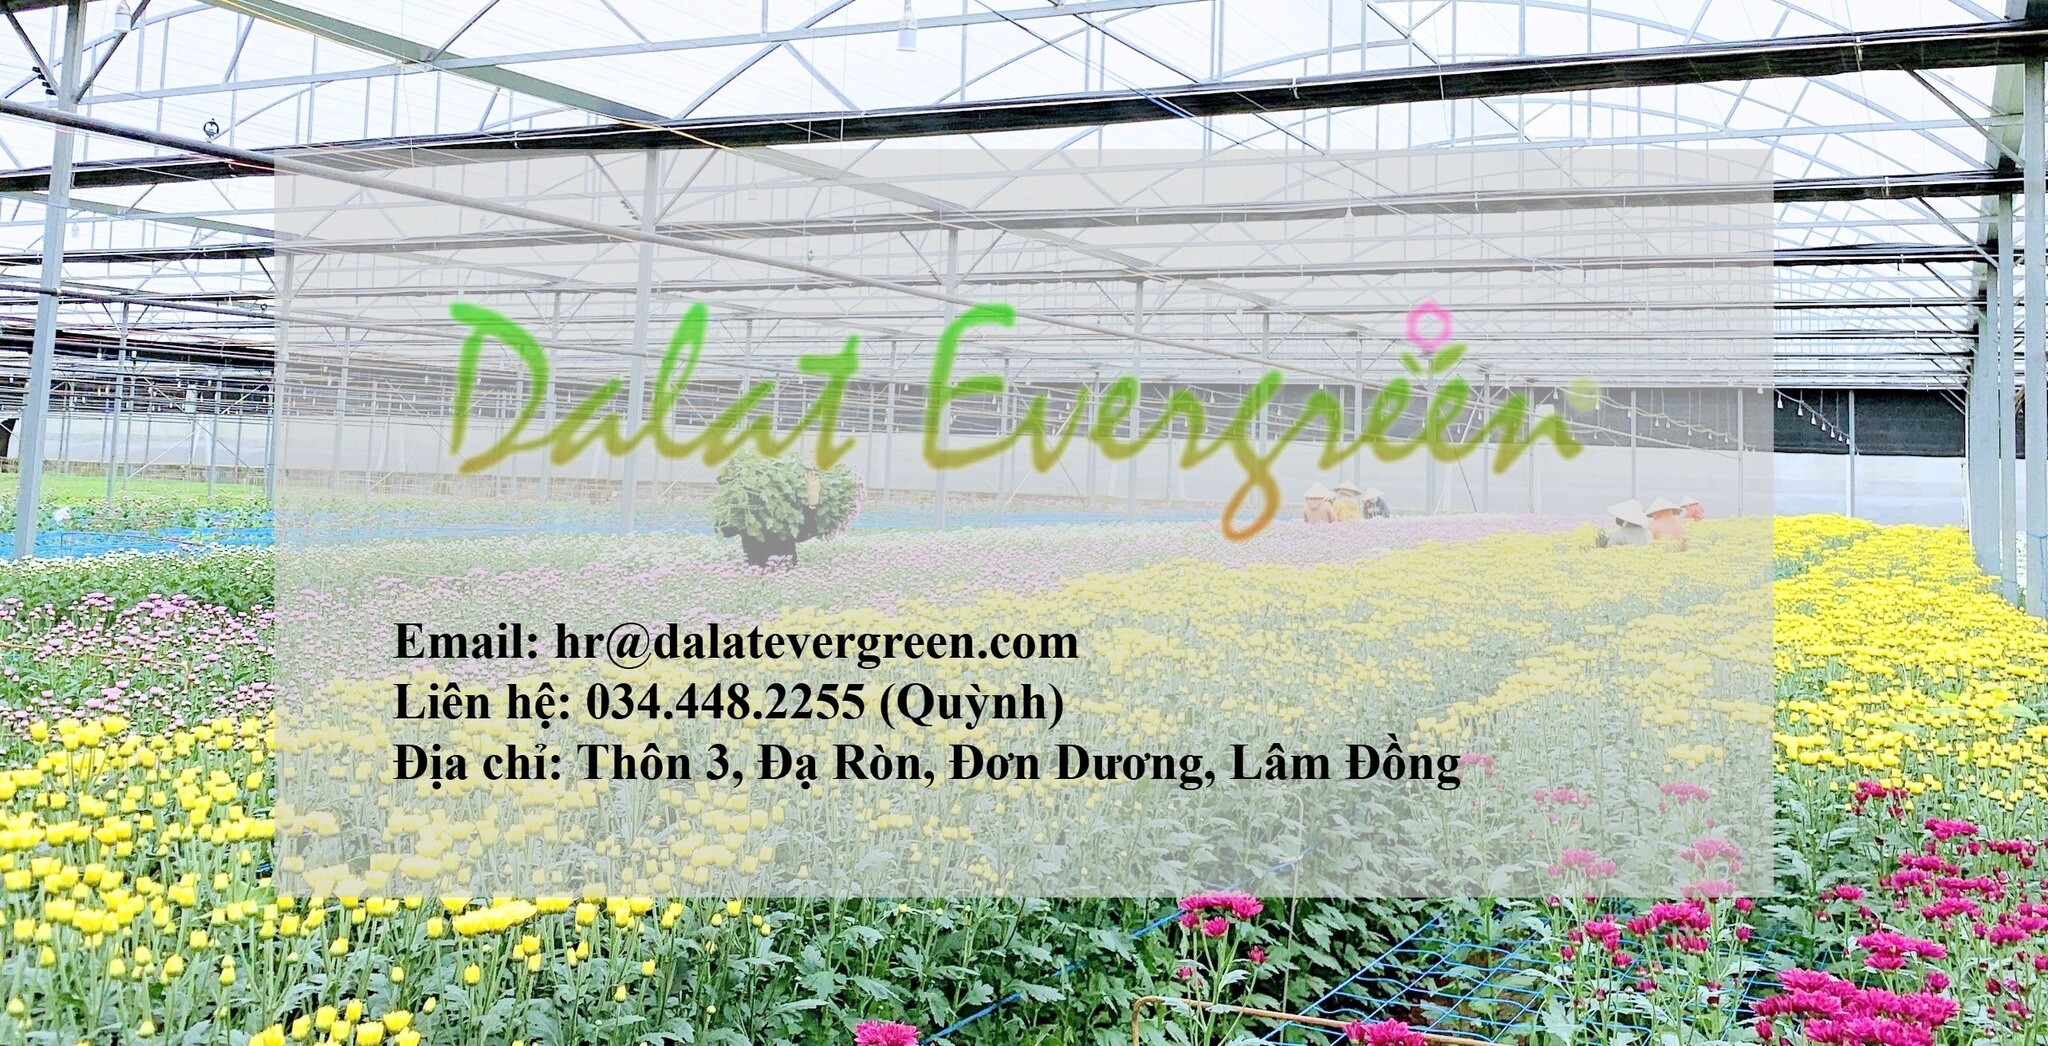 Cover image for Dalat Evergreen